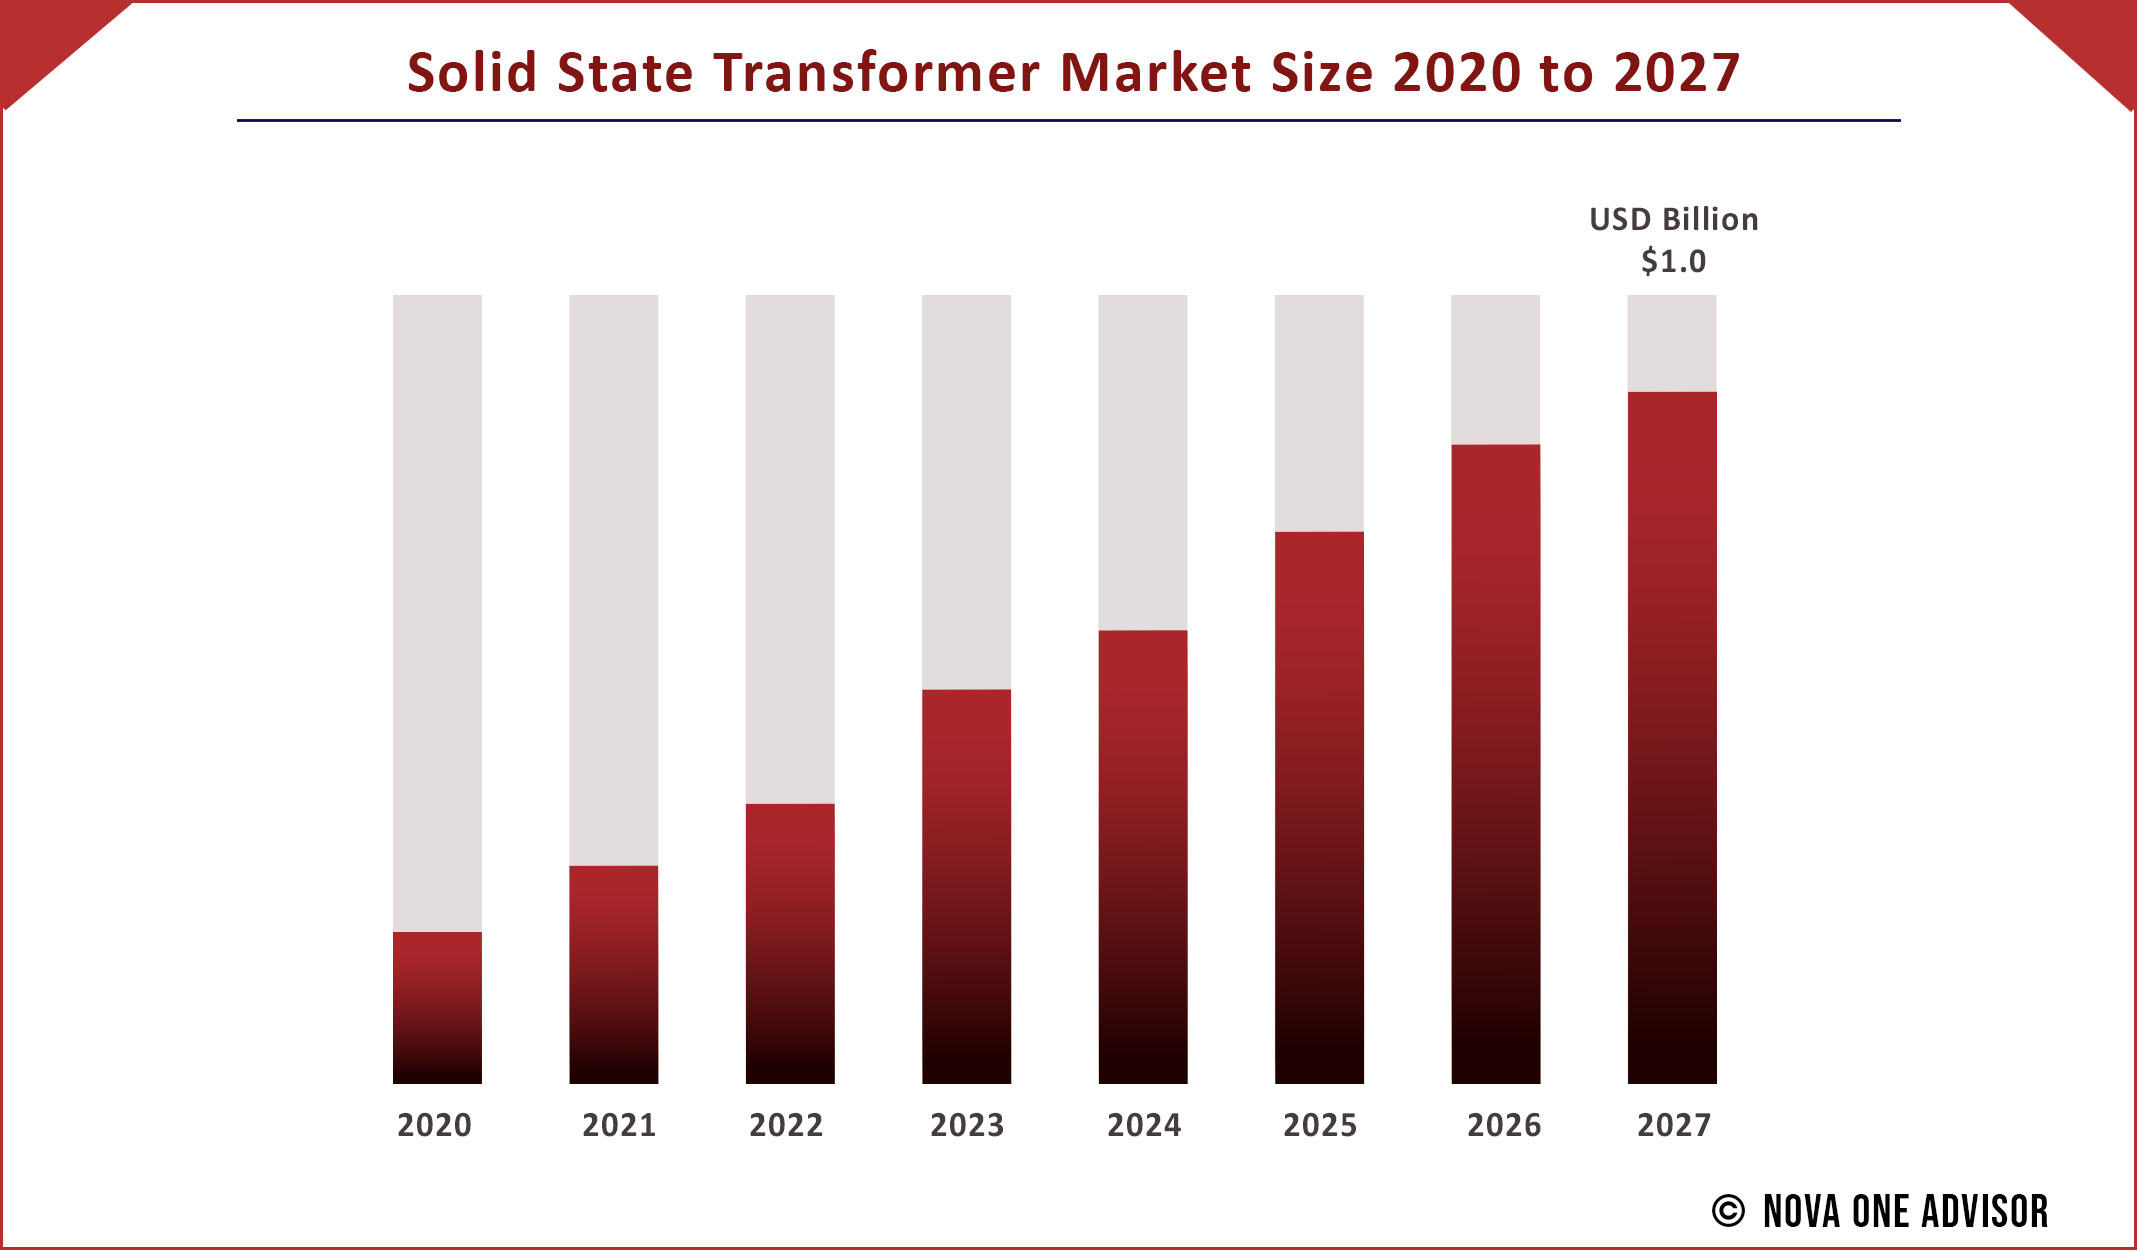 Solid State Transformer Market Size 2020 to 2027